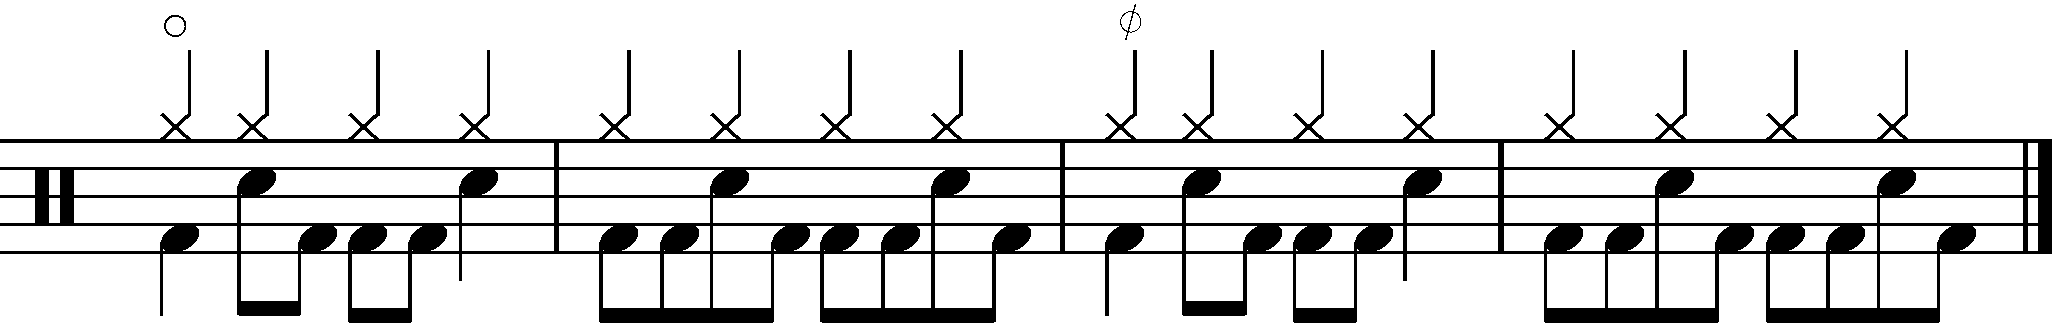 Examples of changing hi hat notation